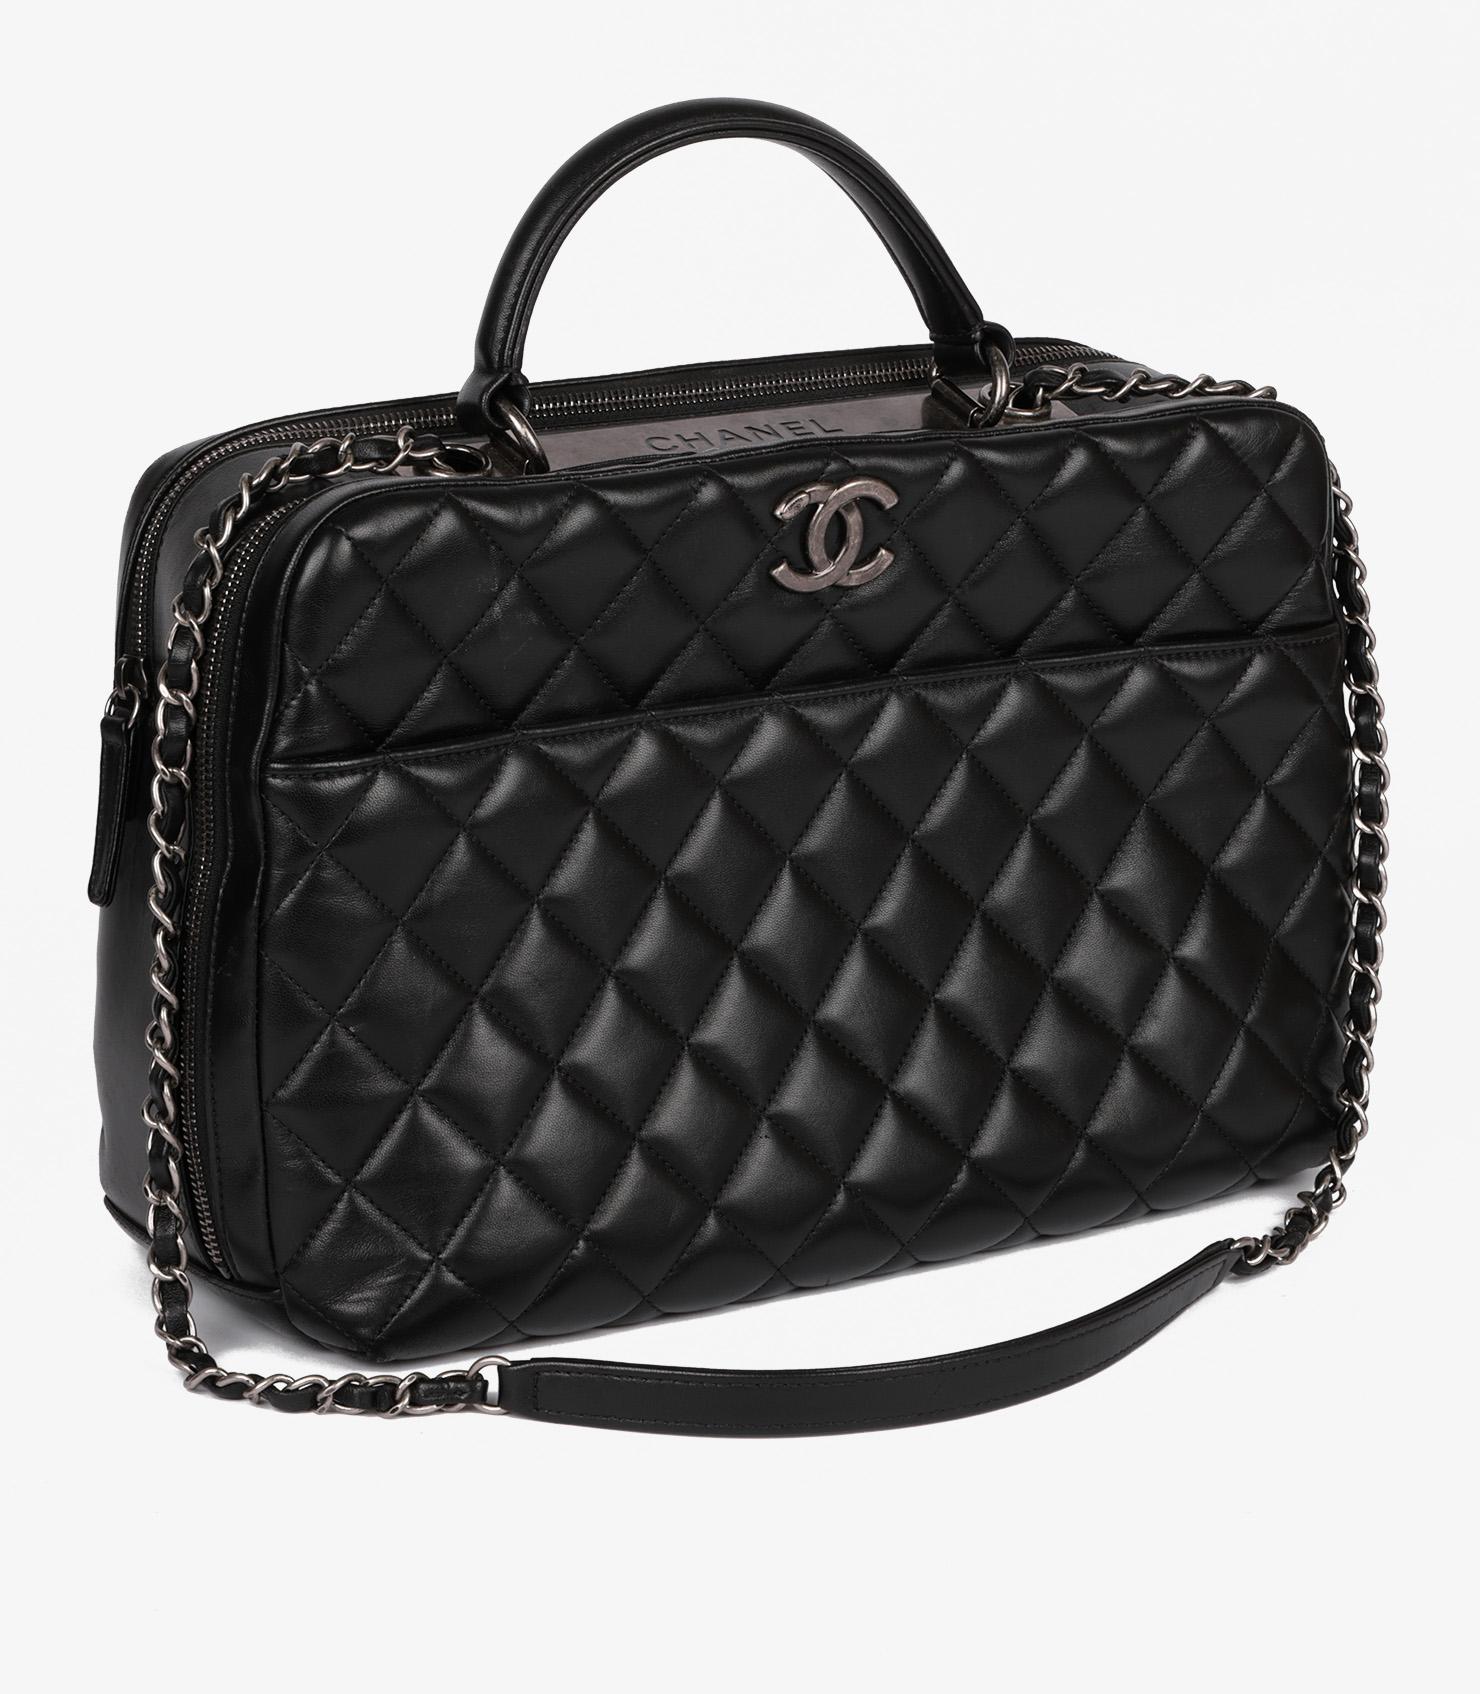 Chanel Black Quilted Lambskin Large Trendy CC Bowling Bag

Brand- Chanel
Model- Large Trendy CC Bowling Bag
Product Type- Crossbody, Shoulder, Top Handle
Serial Number- 21******
Age- Circa 2015
Accompanied By- Chanel Box, Dust Bag, Authenticity